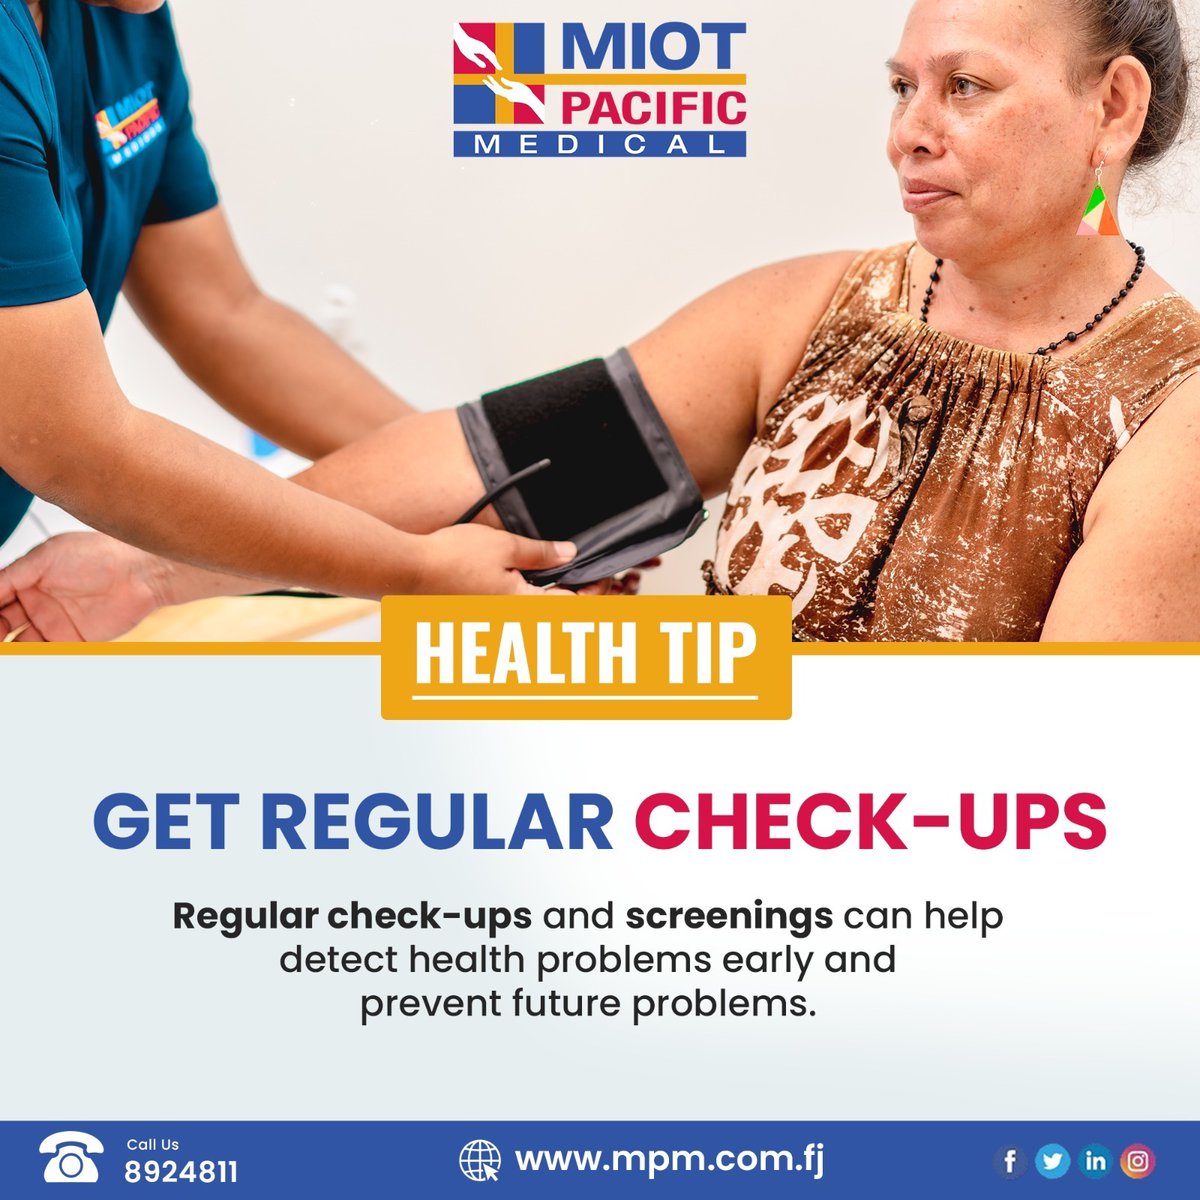 It is a good idea to visit a doctor regularly, even if you feel healthy. The purpose of these visits is to check for current or emerging medical problems and assess your risk of future issues.

#Healthtip #Health #Healthtipoftheday #healthcheck #screening #MIOTPacificMedical